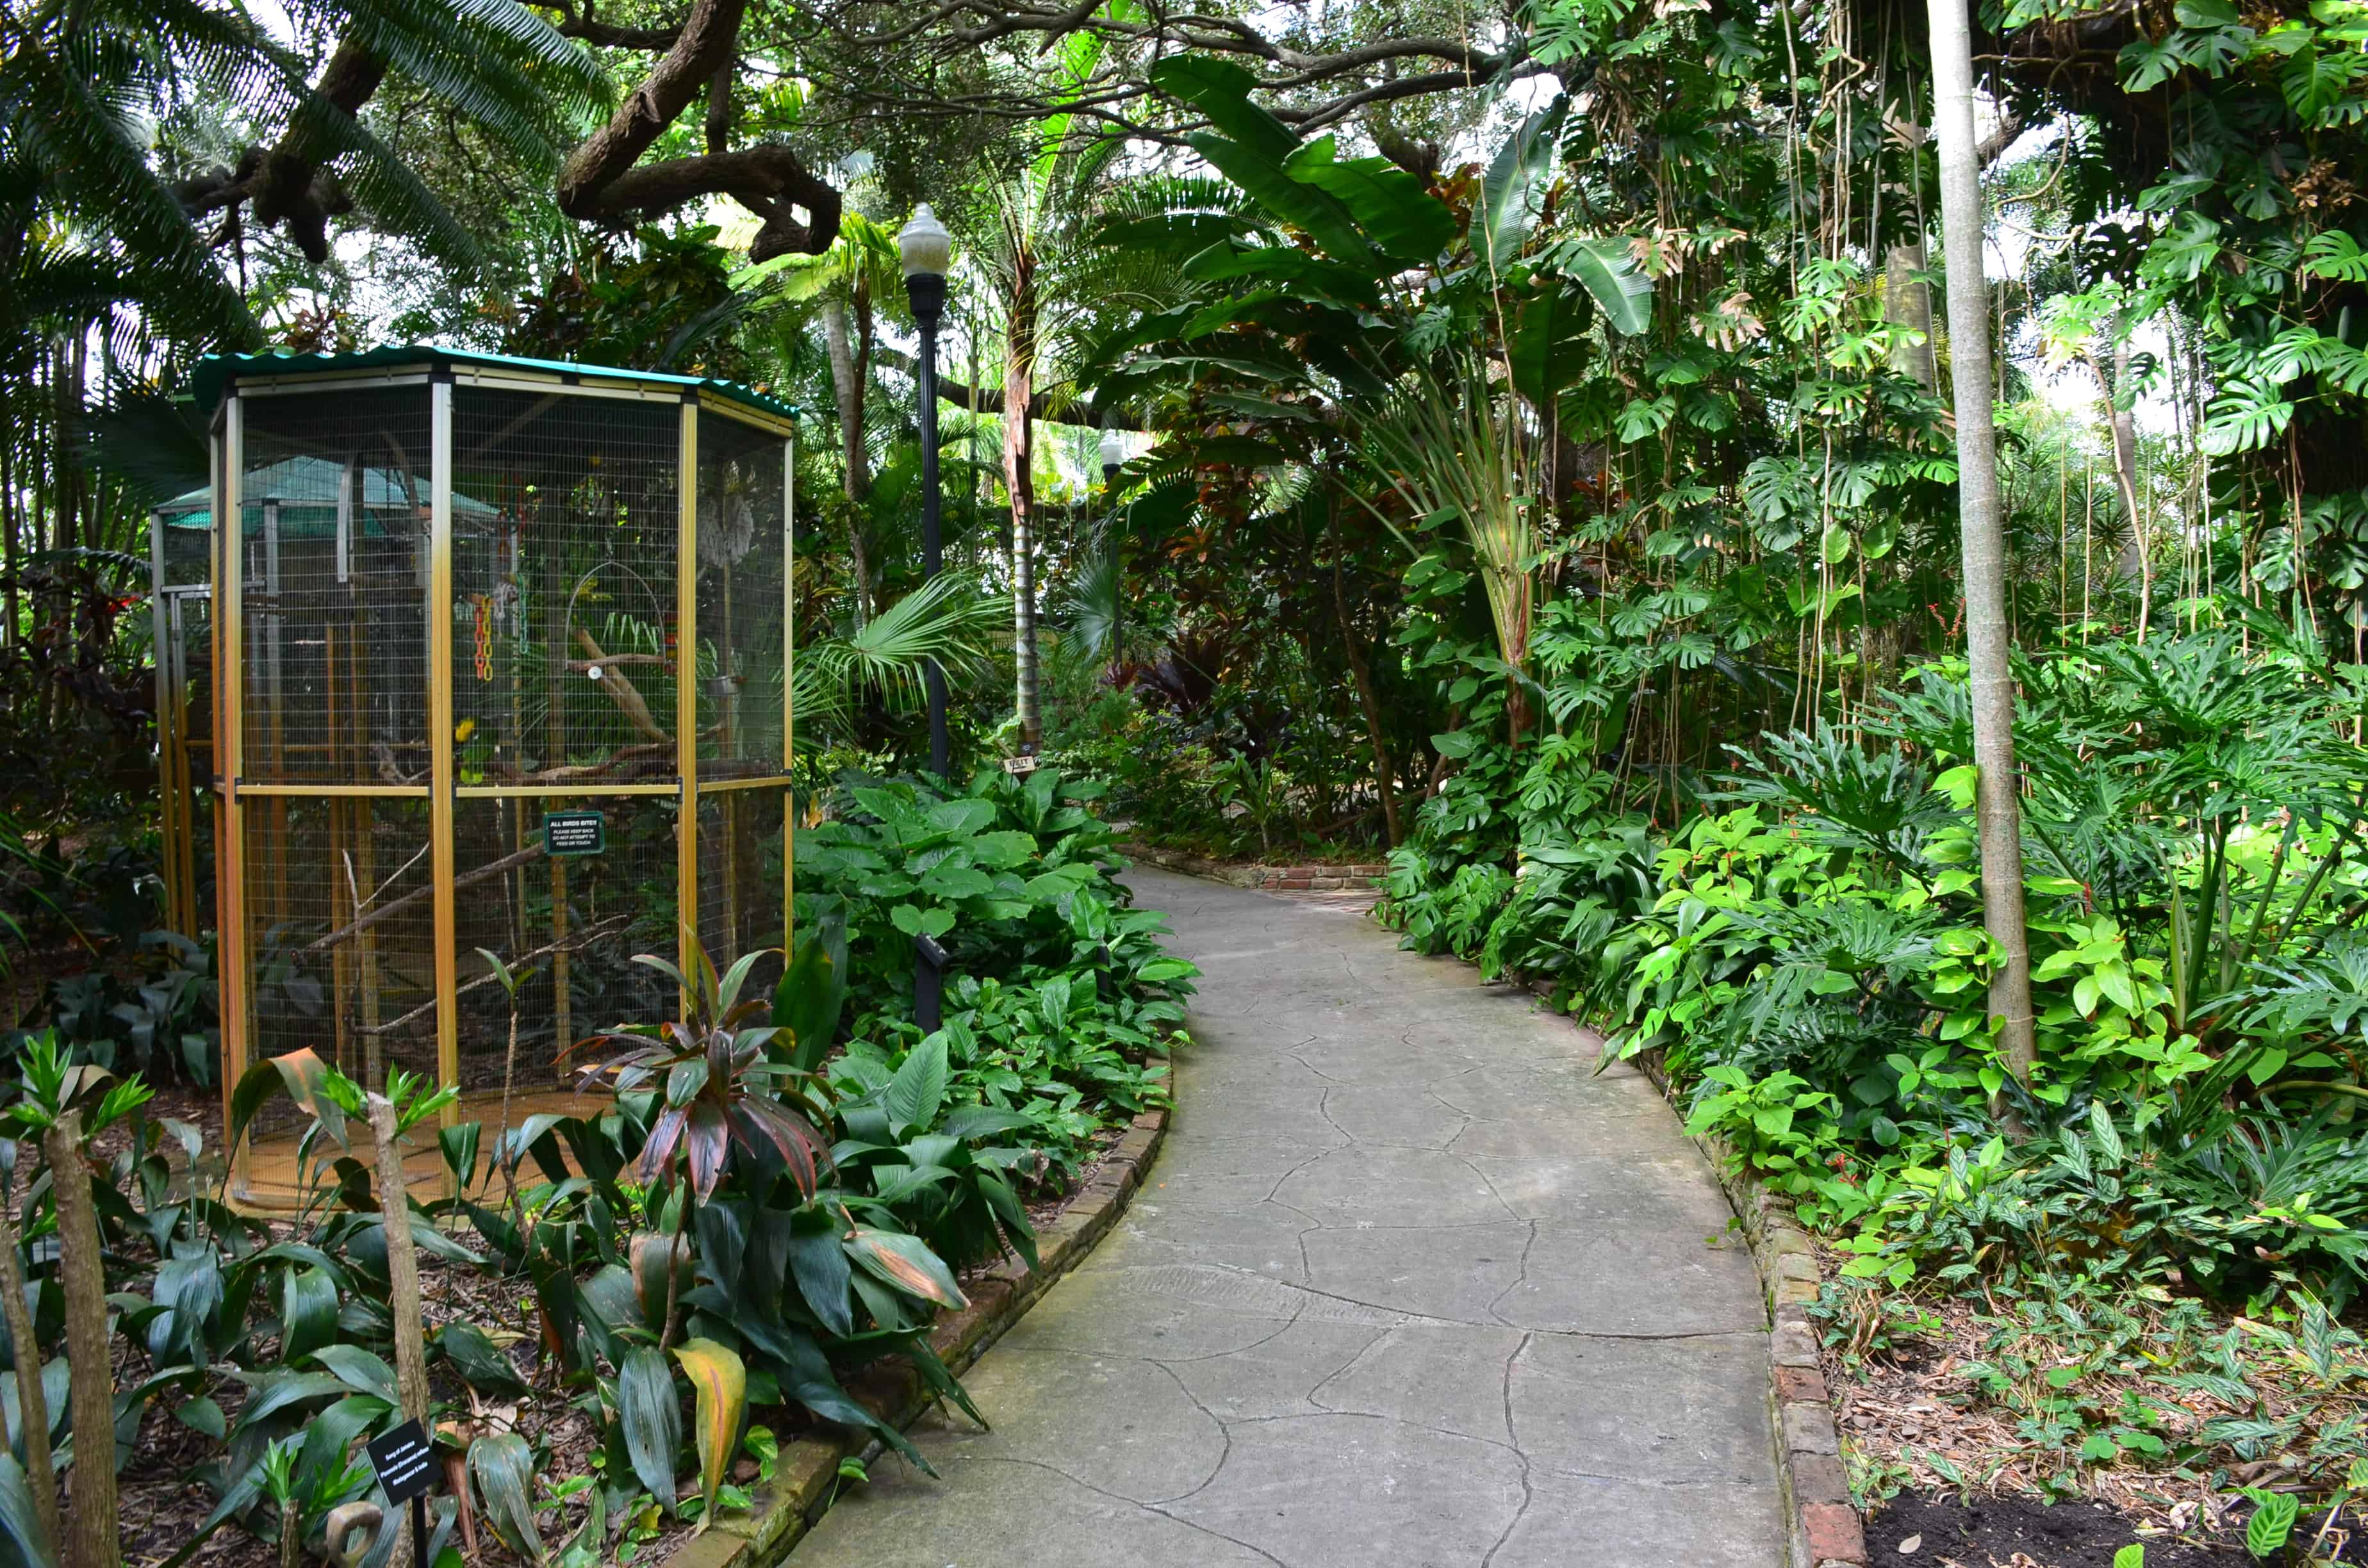 Parrot cage at the Sunken Gardens in St. Petersburg, Florida